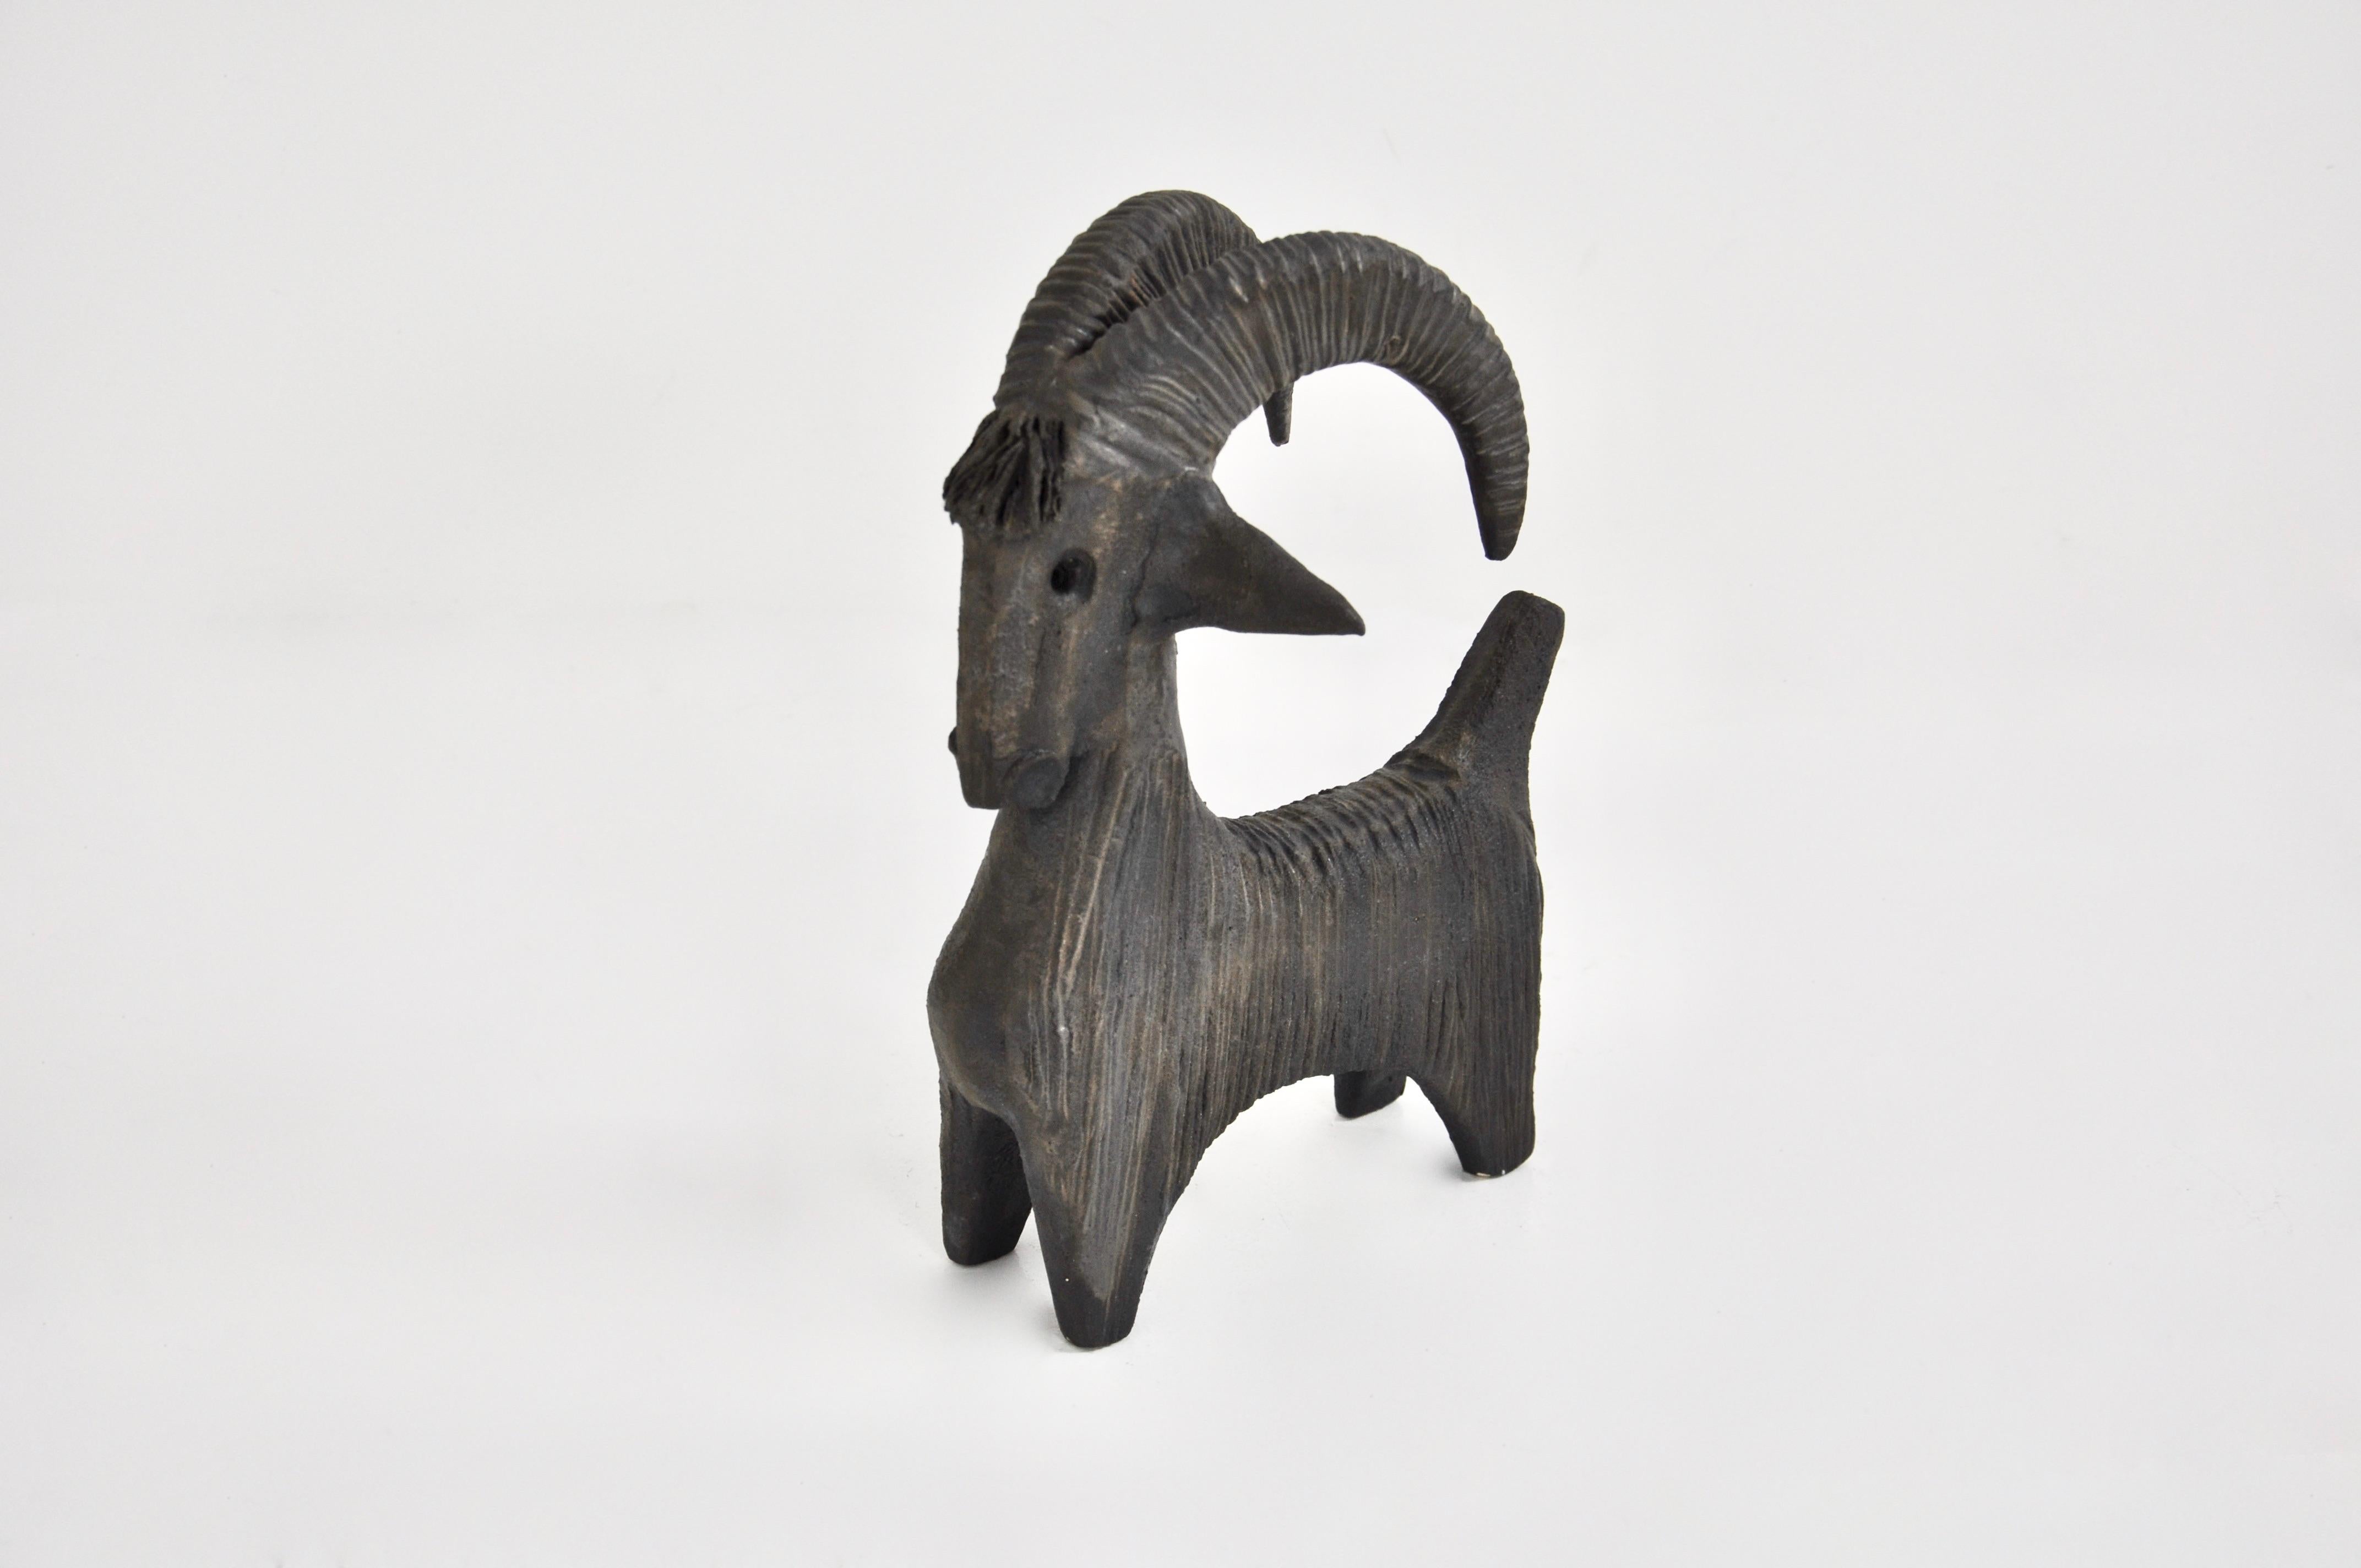  Ceramic in the shape of a goat designed by Dominique Pouchain. Stamped on the underside.